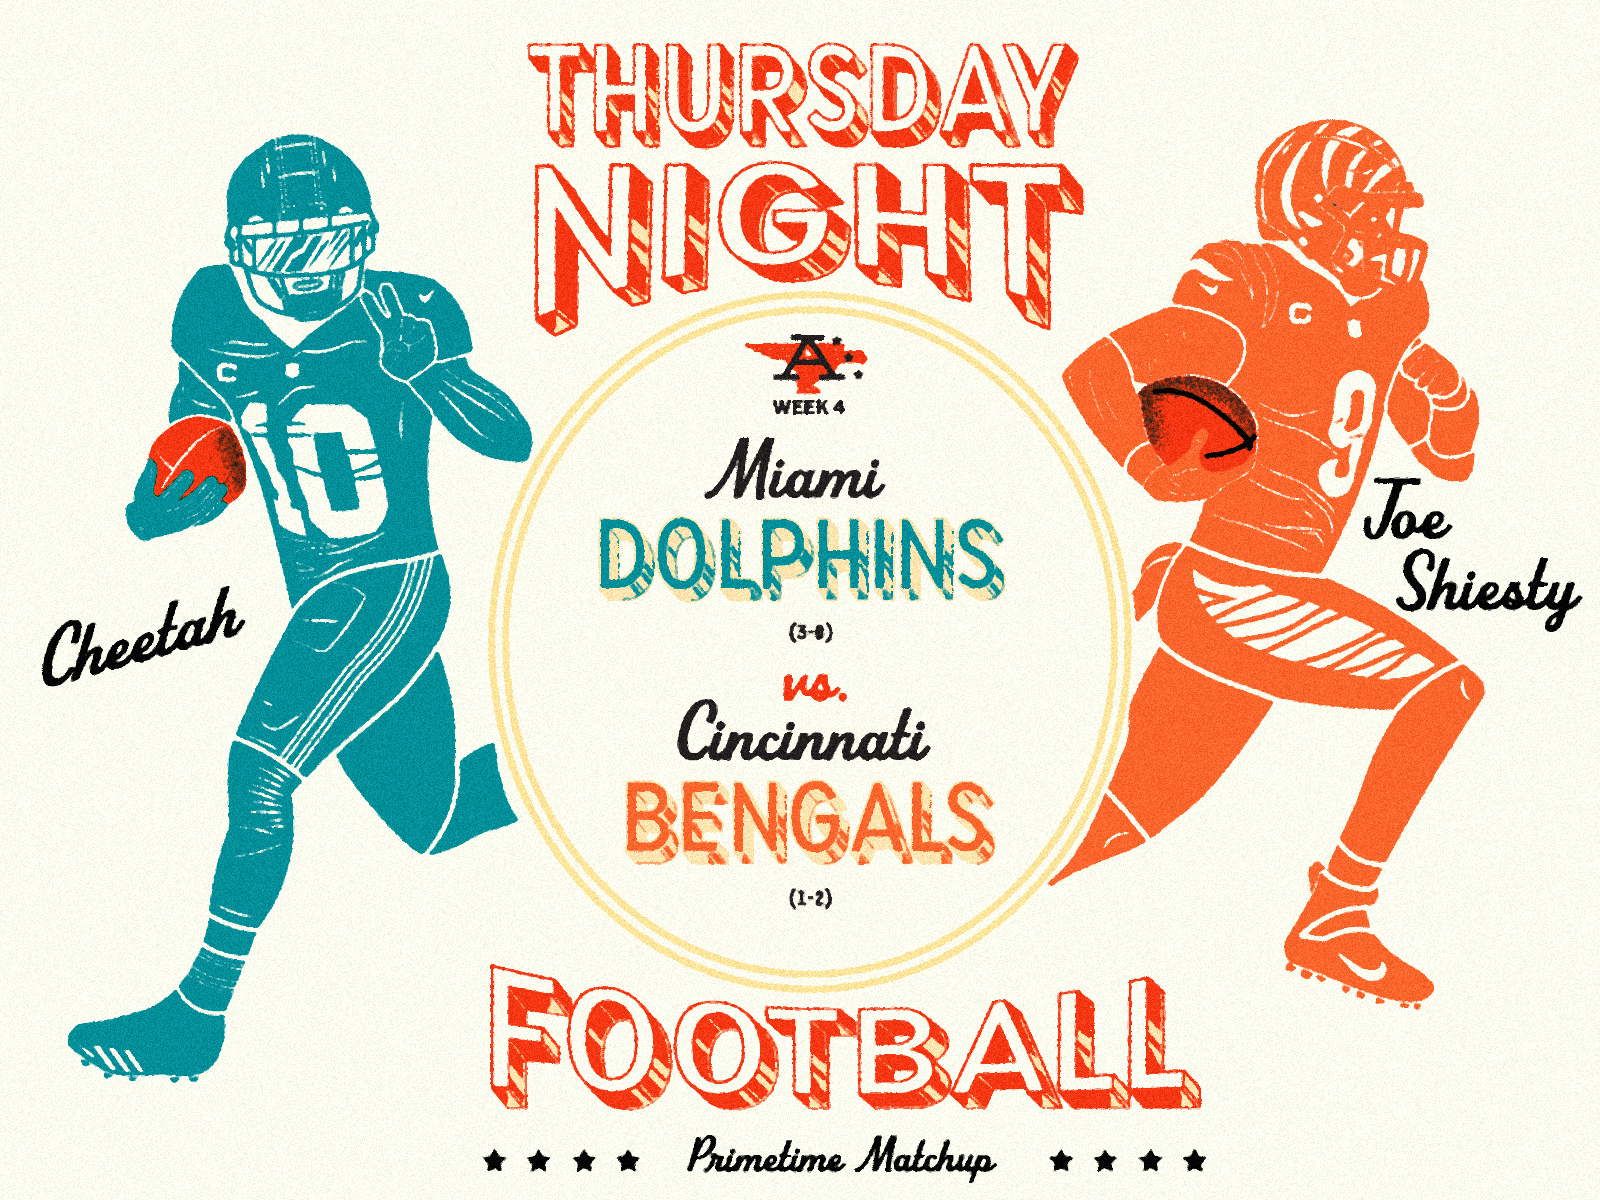 TNF-Dolphins v. Bengals by Bekeri Bousso on Dribbble